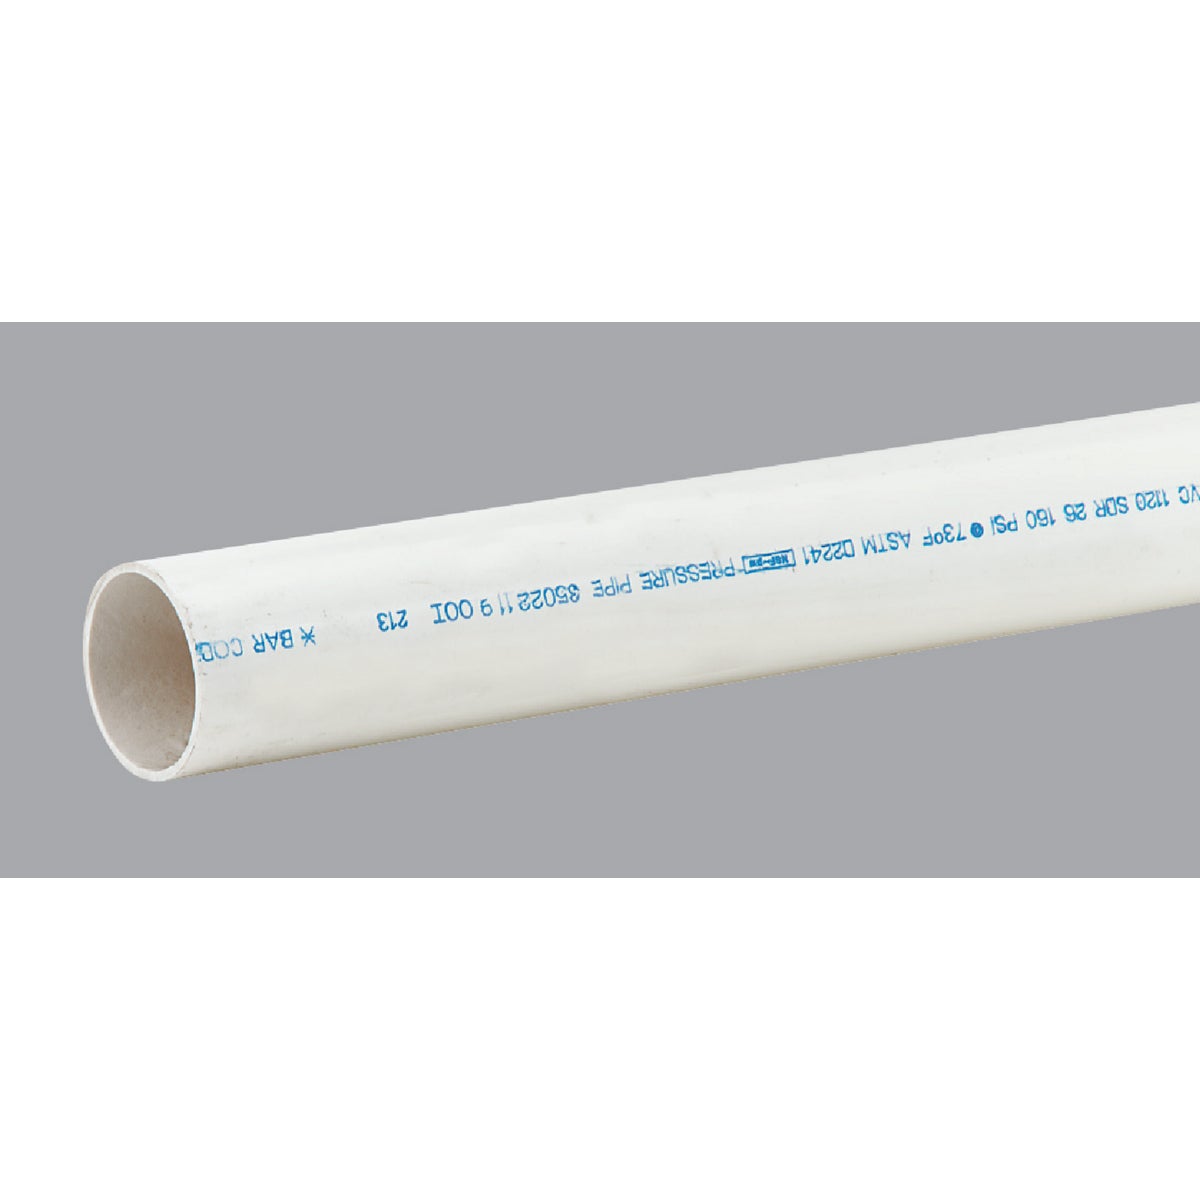 Charlotte Pipe 2 In. x 10 Ft. Cold Water PVC Pressure Pipe, SDR 26